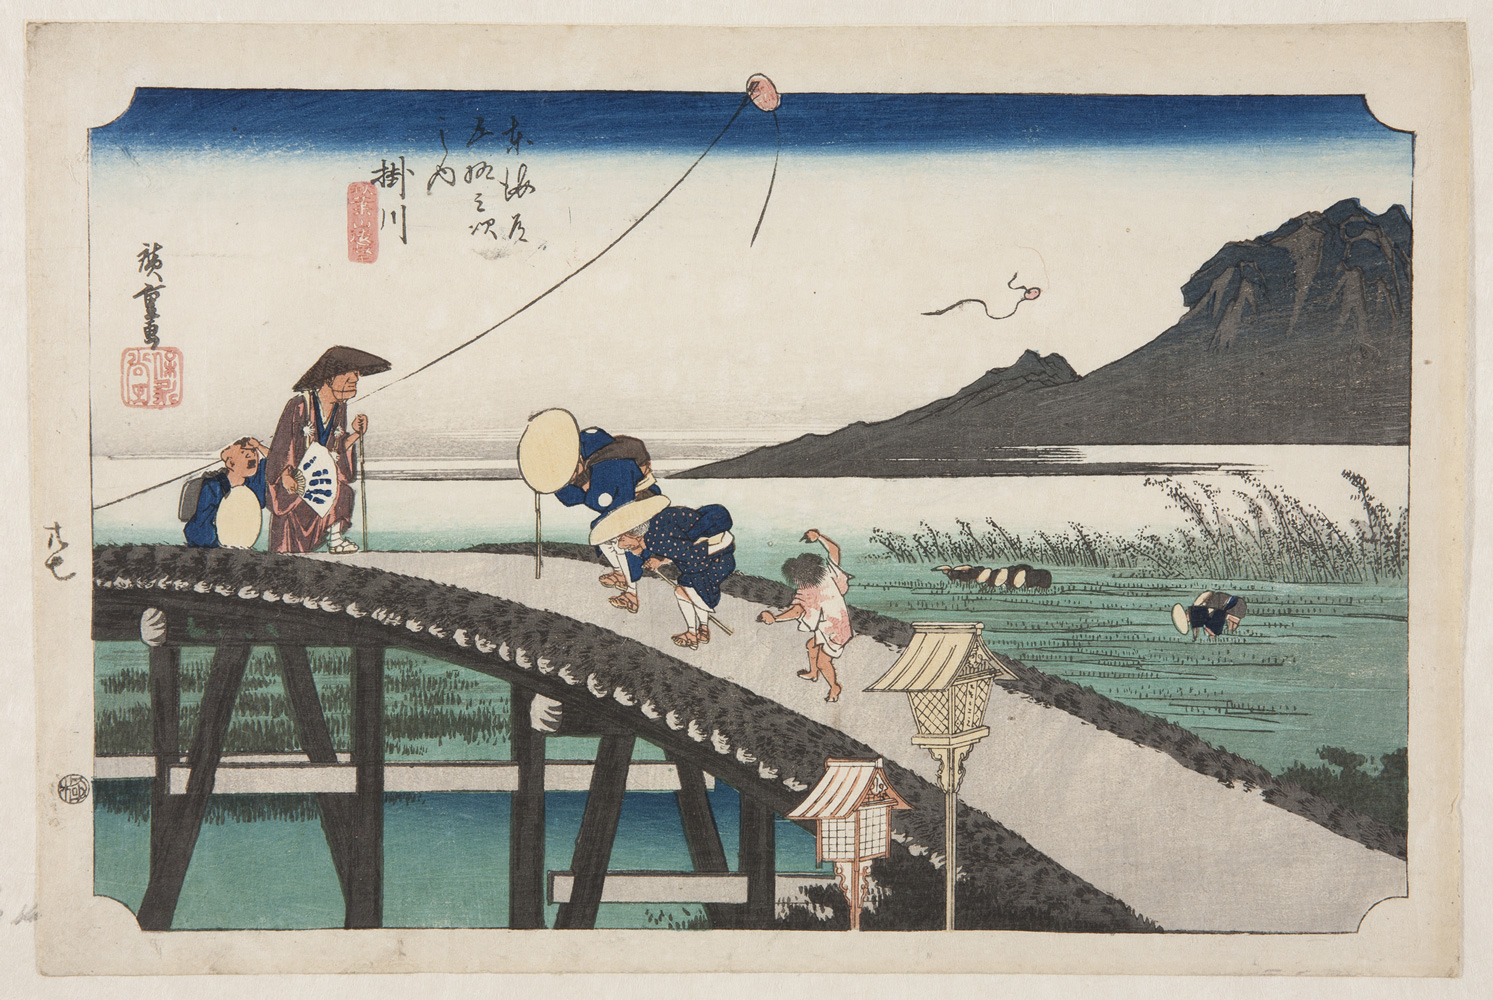 japanese print of people in traditional japanese dress walking over a wooden brige. in the background people pick rice in rice fields in front of a mountain